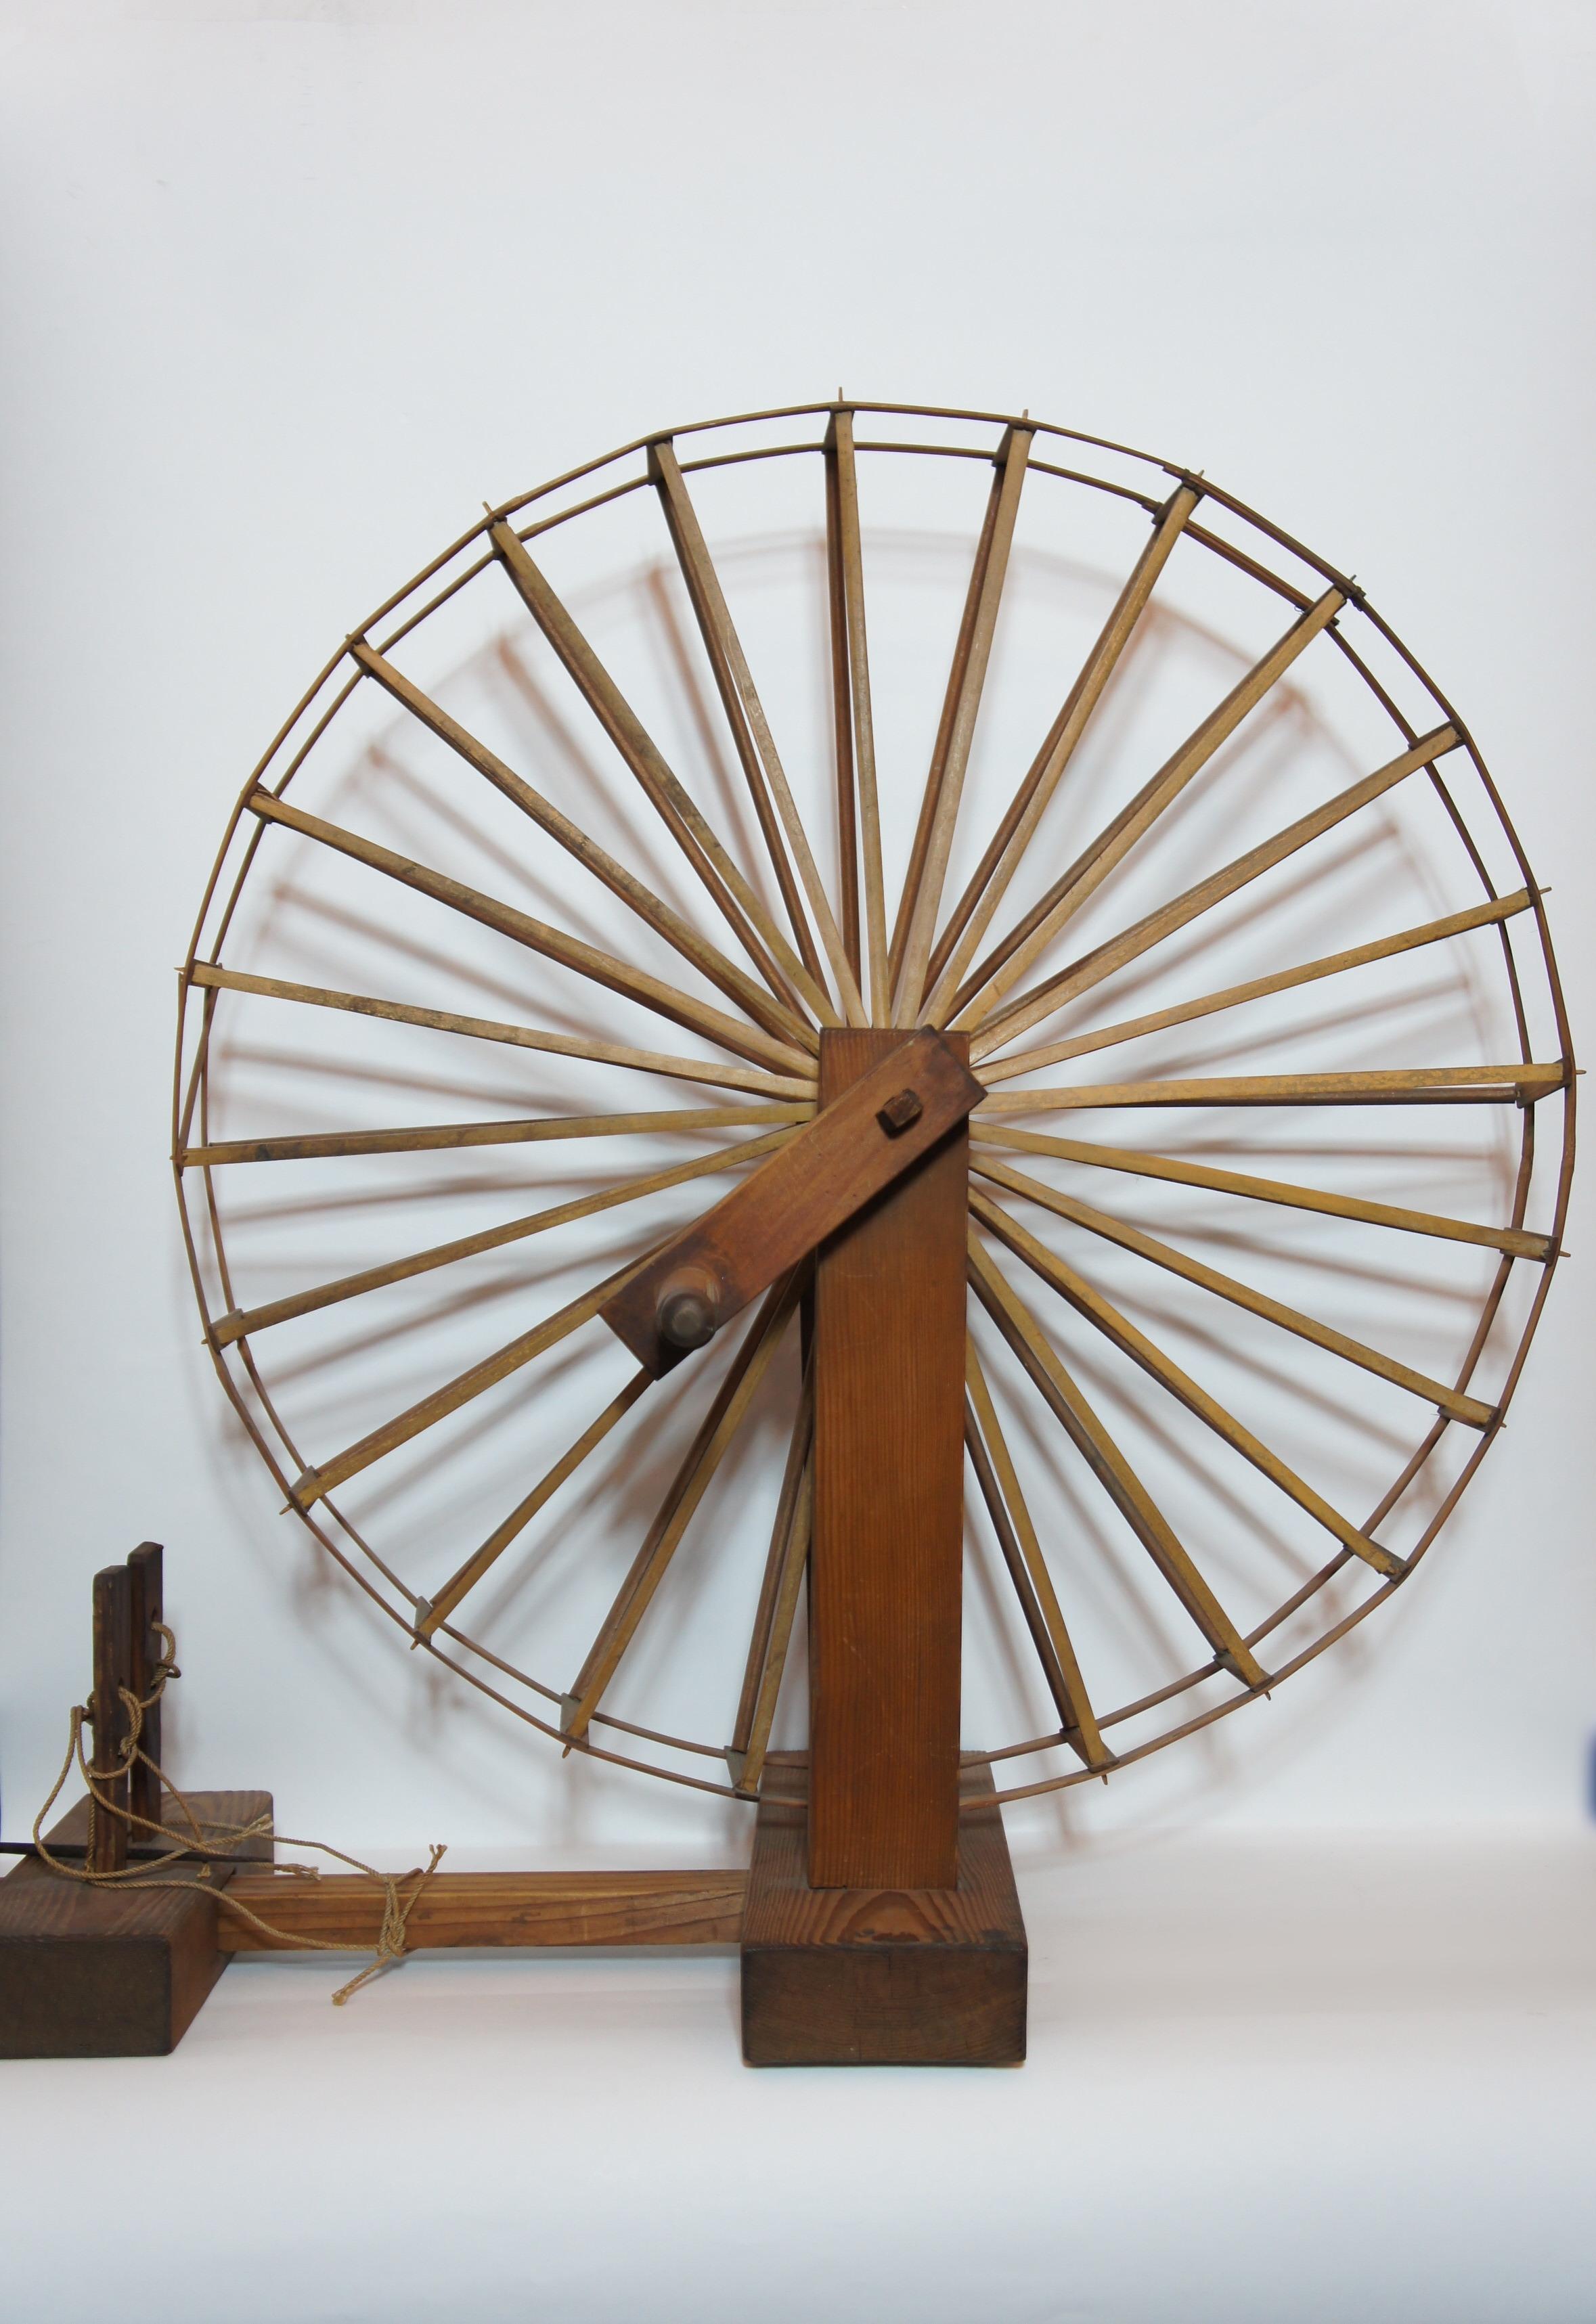 The spinning wheels are invented in Persia around the 13th century and introduced to India. It is thought to have been introduced to Japan in the Edo period. This spinning wheel is made in 1960s (mid-Showa era) and made of wood.